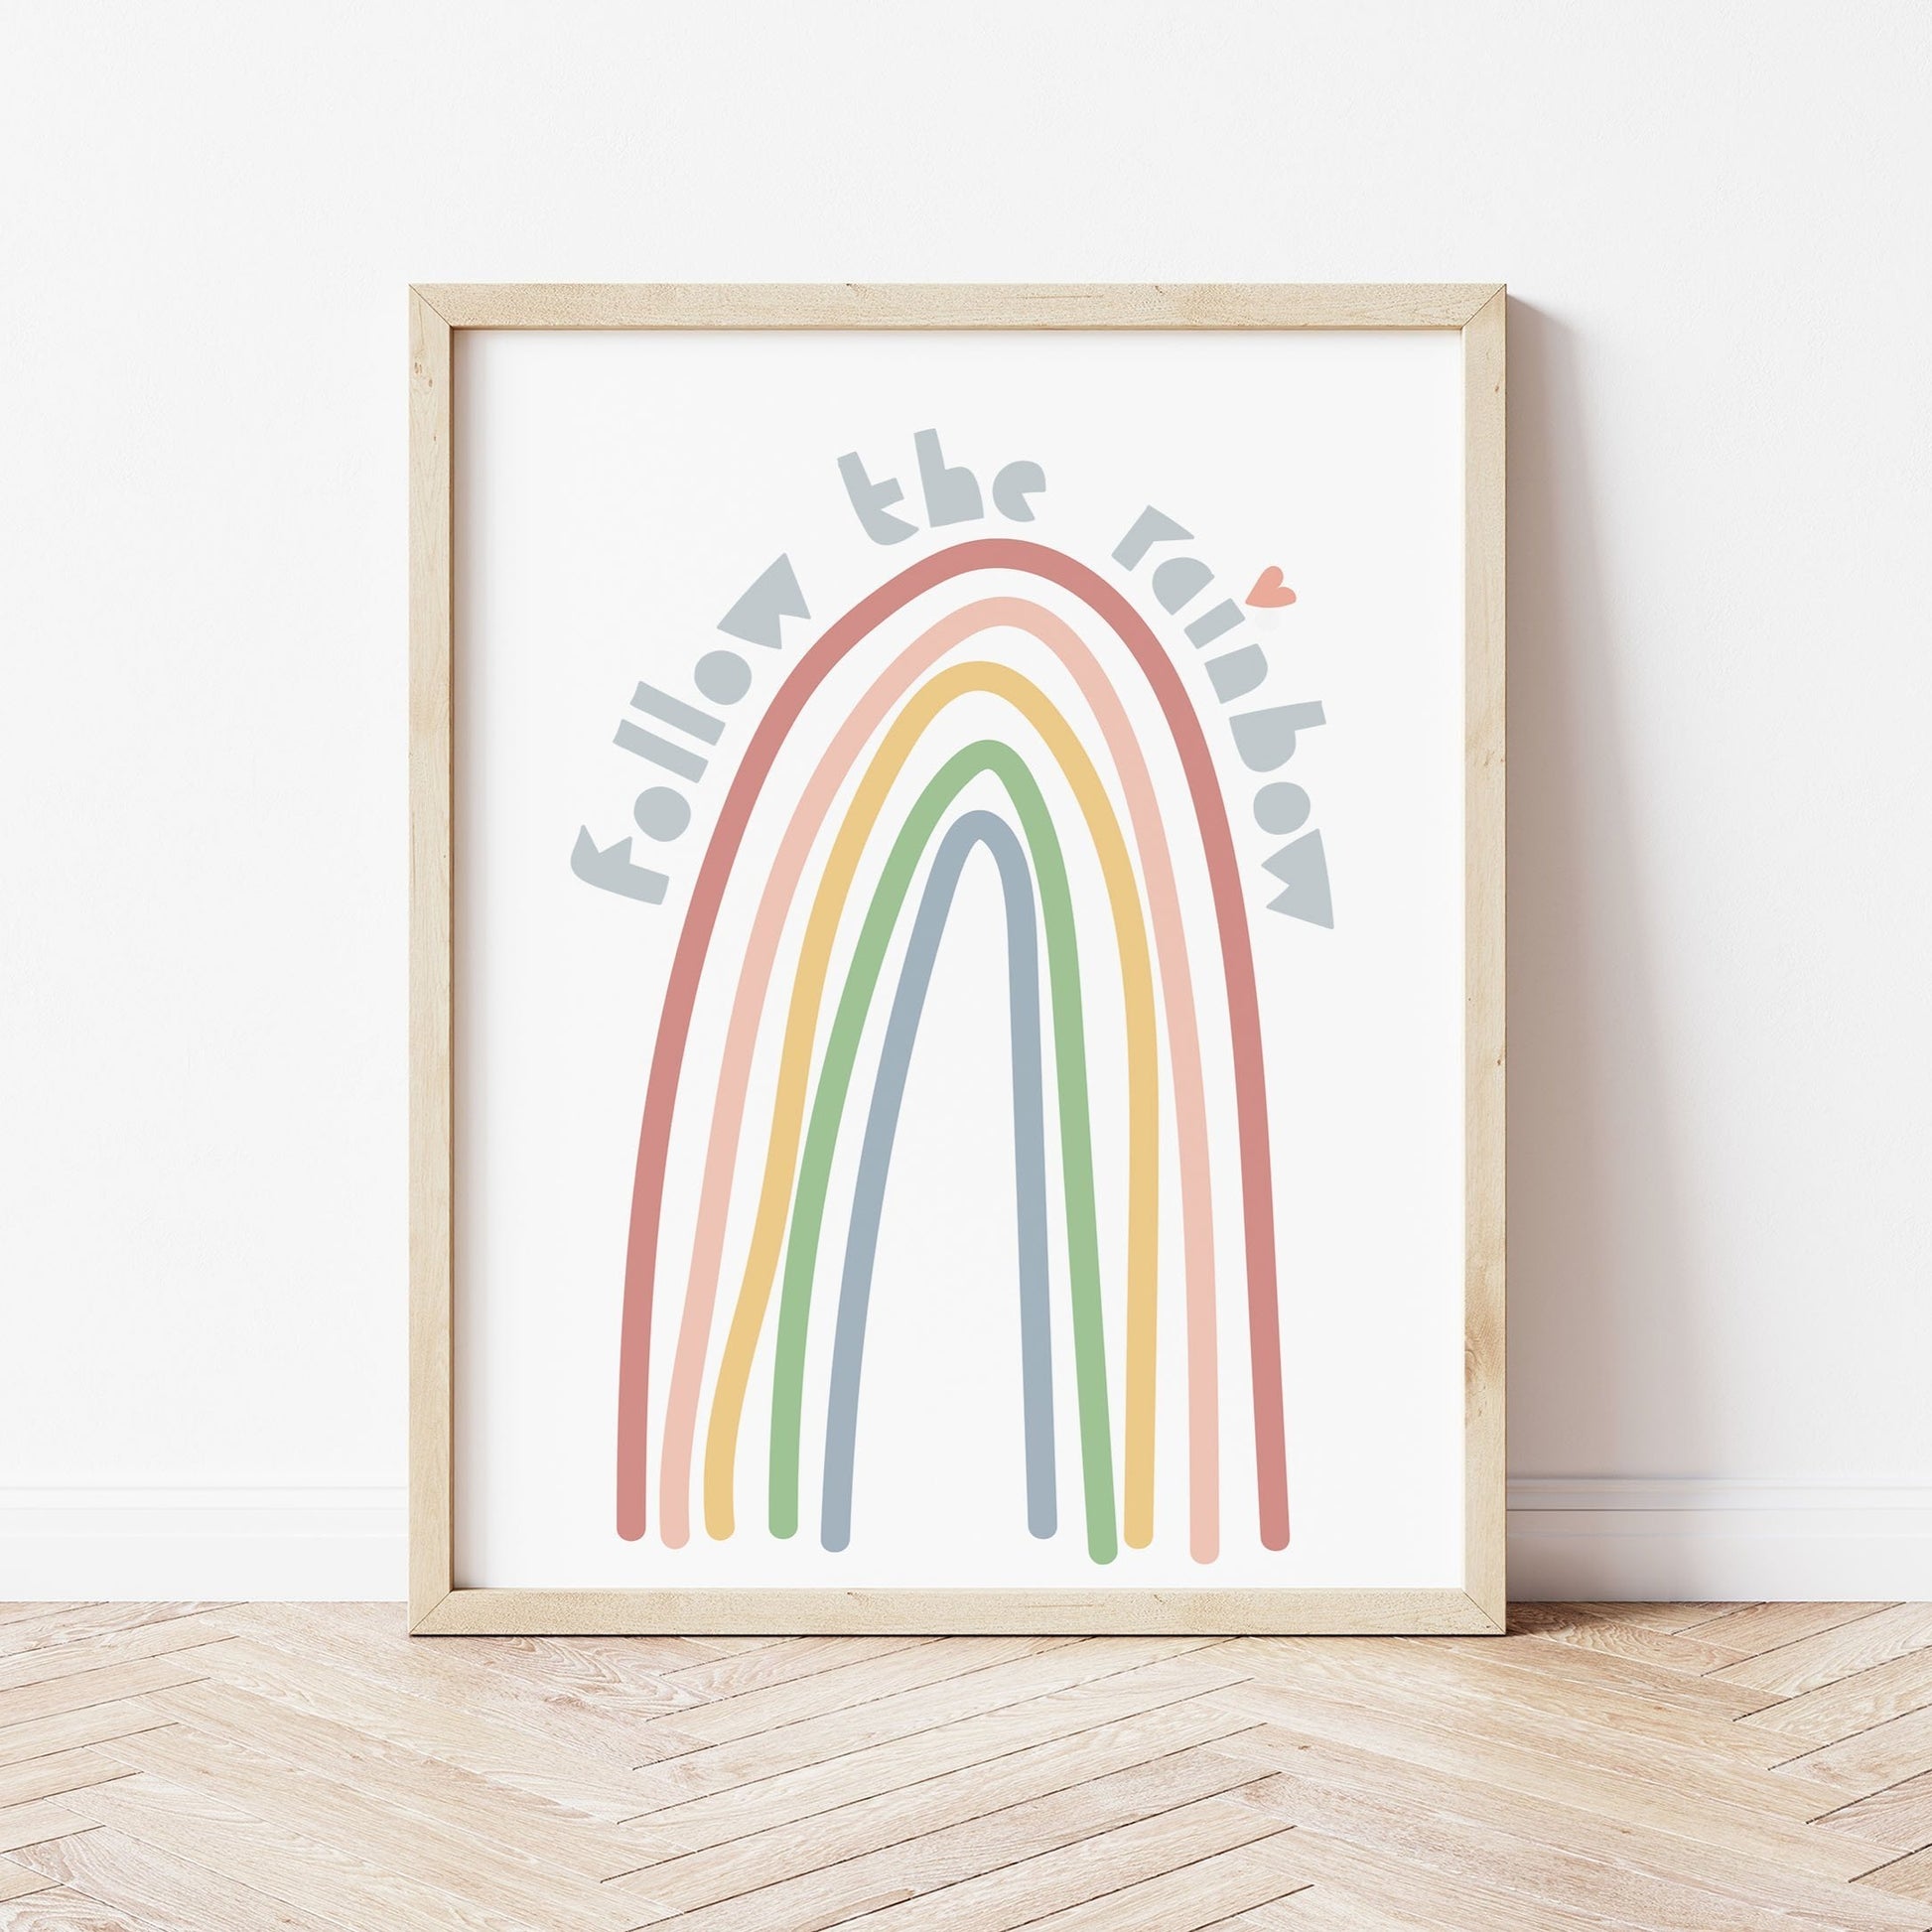 Follow the Rainbow (Muted) Art Print by The Little Jones (3 Sizes Available)